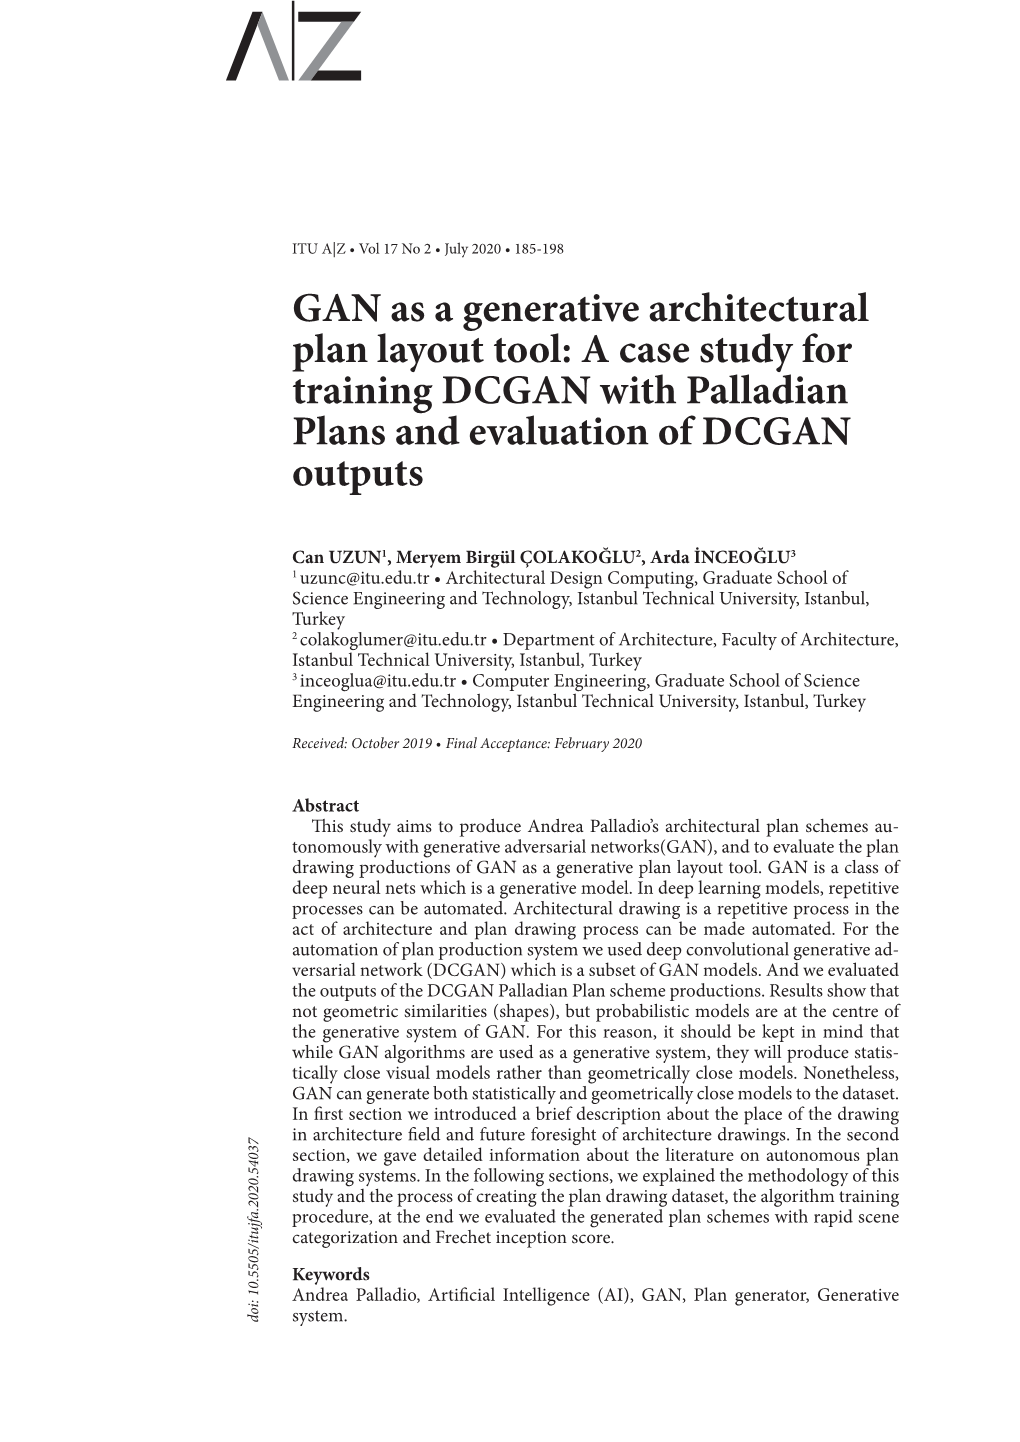 GAN As a Generative Architectural Plan Layout Tool: a Case Study for Training DCGAN with Palladian Plans and Evaluation of DCGAN Outputs